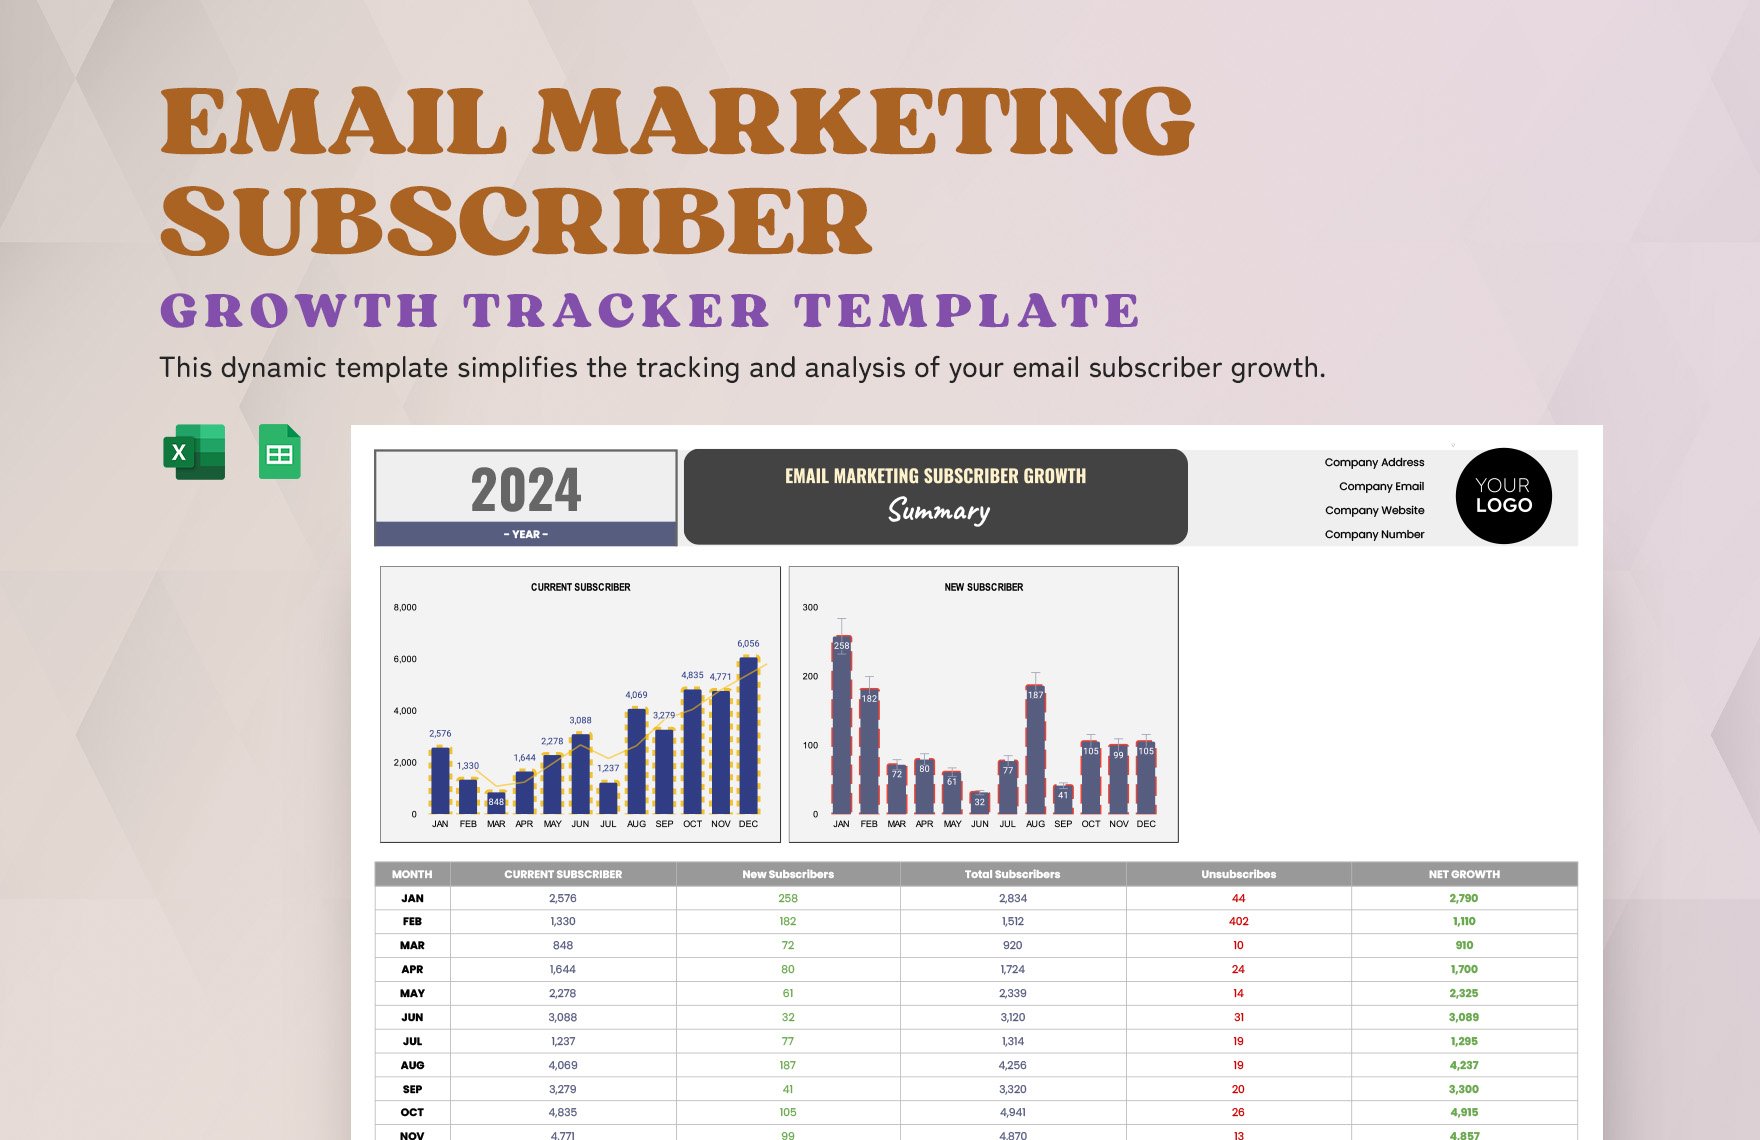 Email Marketing Subscriber Growth Tracker Template